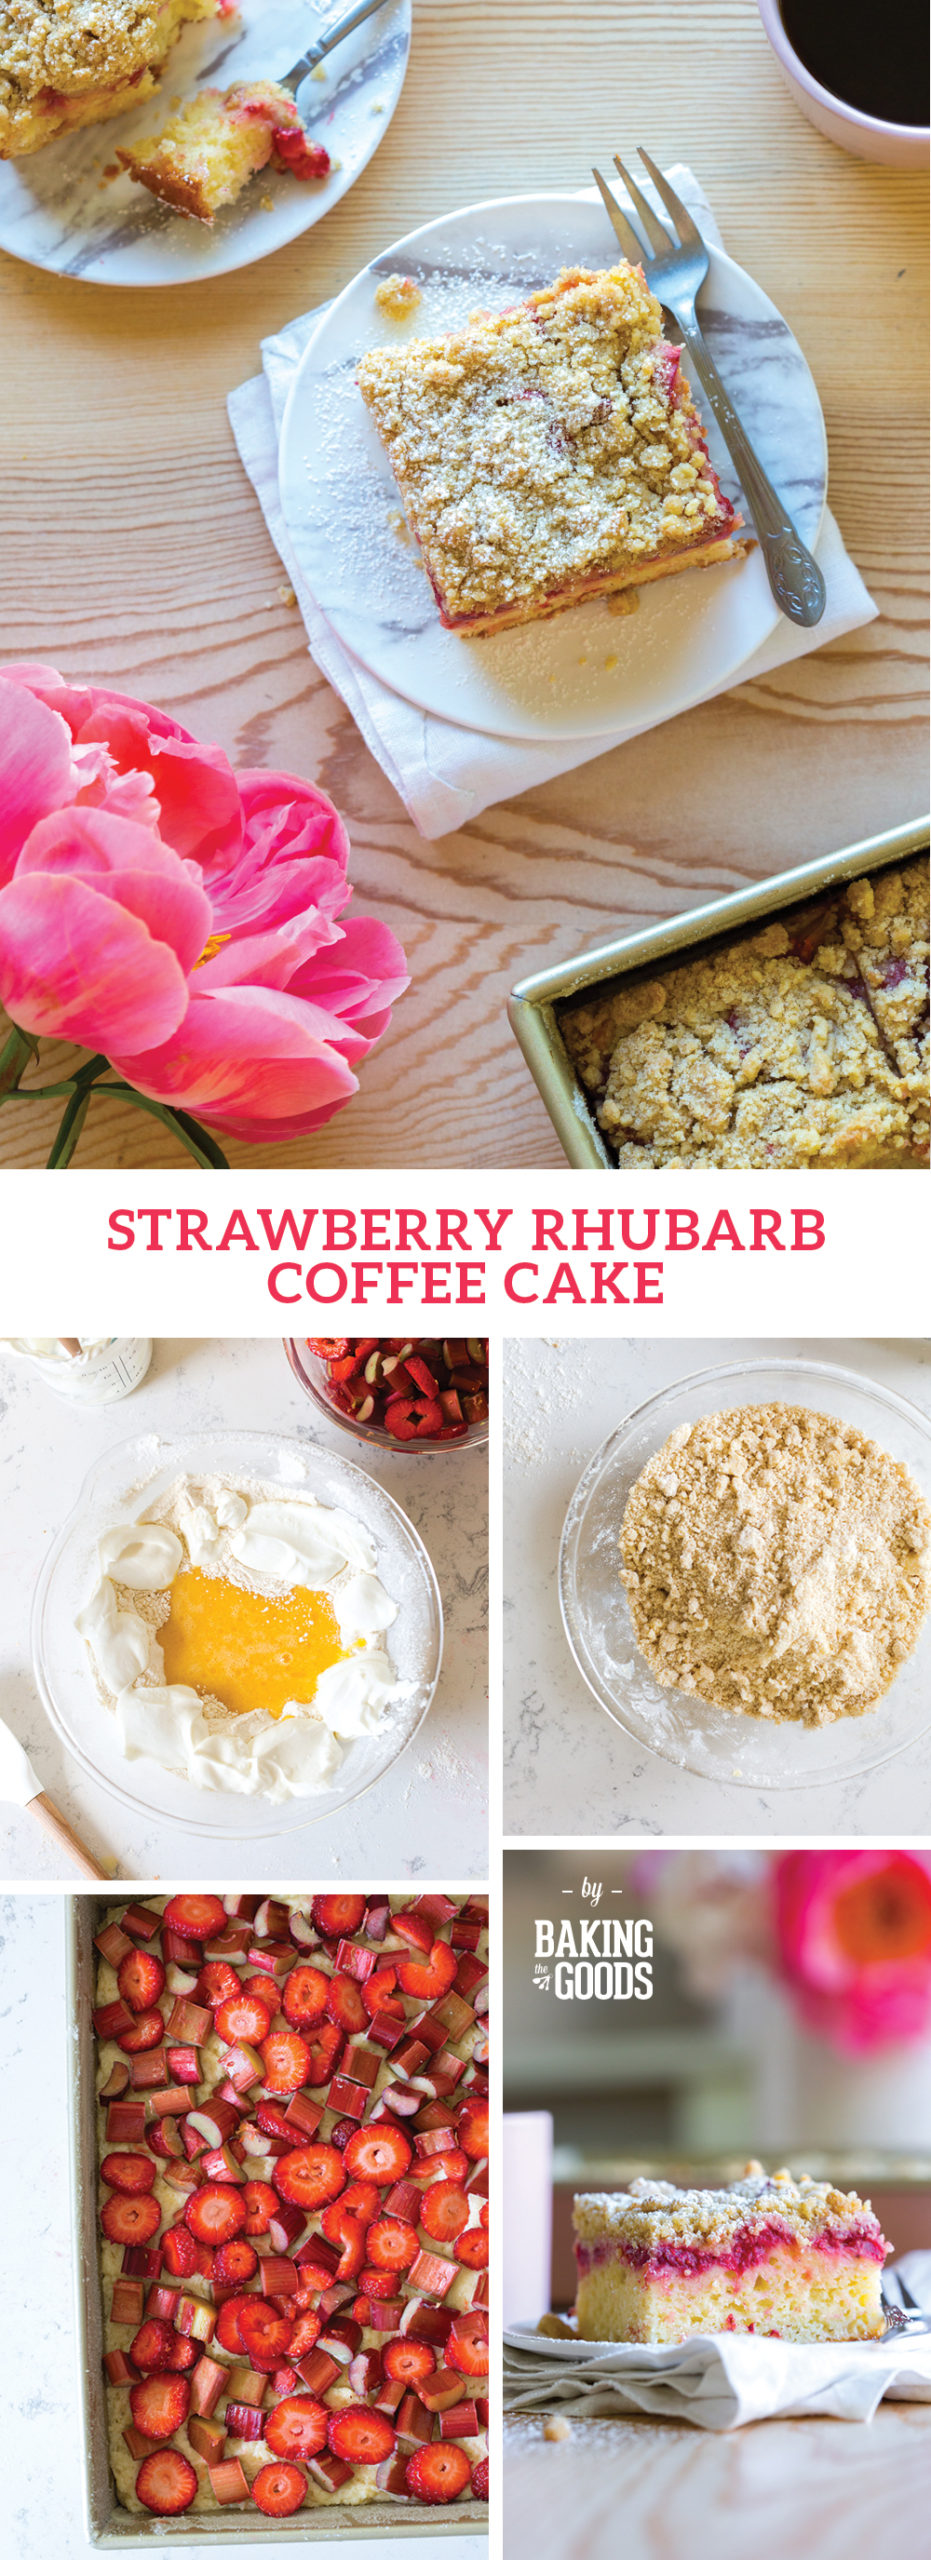 Strawberry Rhubarb Coffee Cake by Baking The Goods